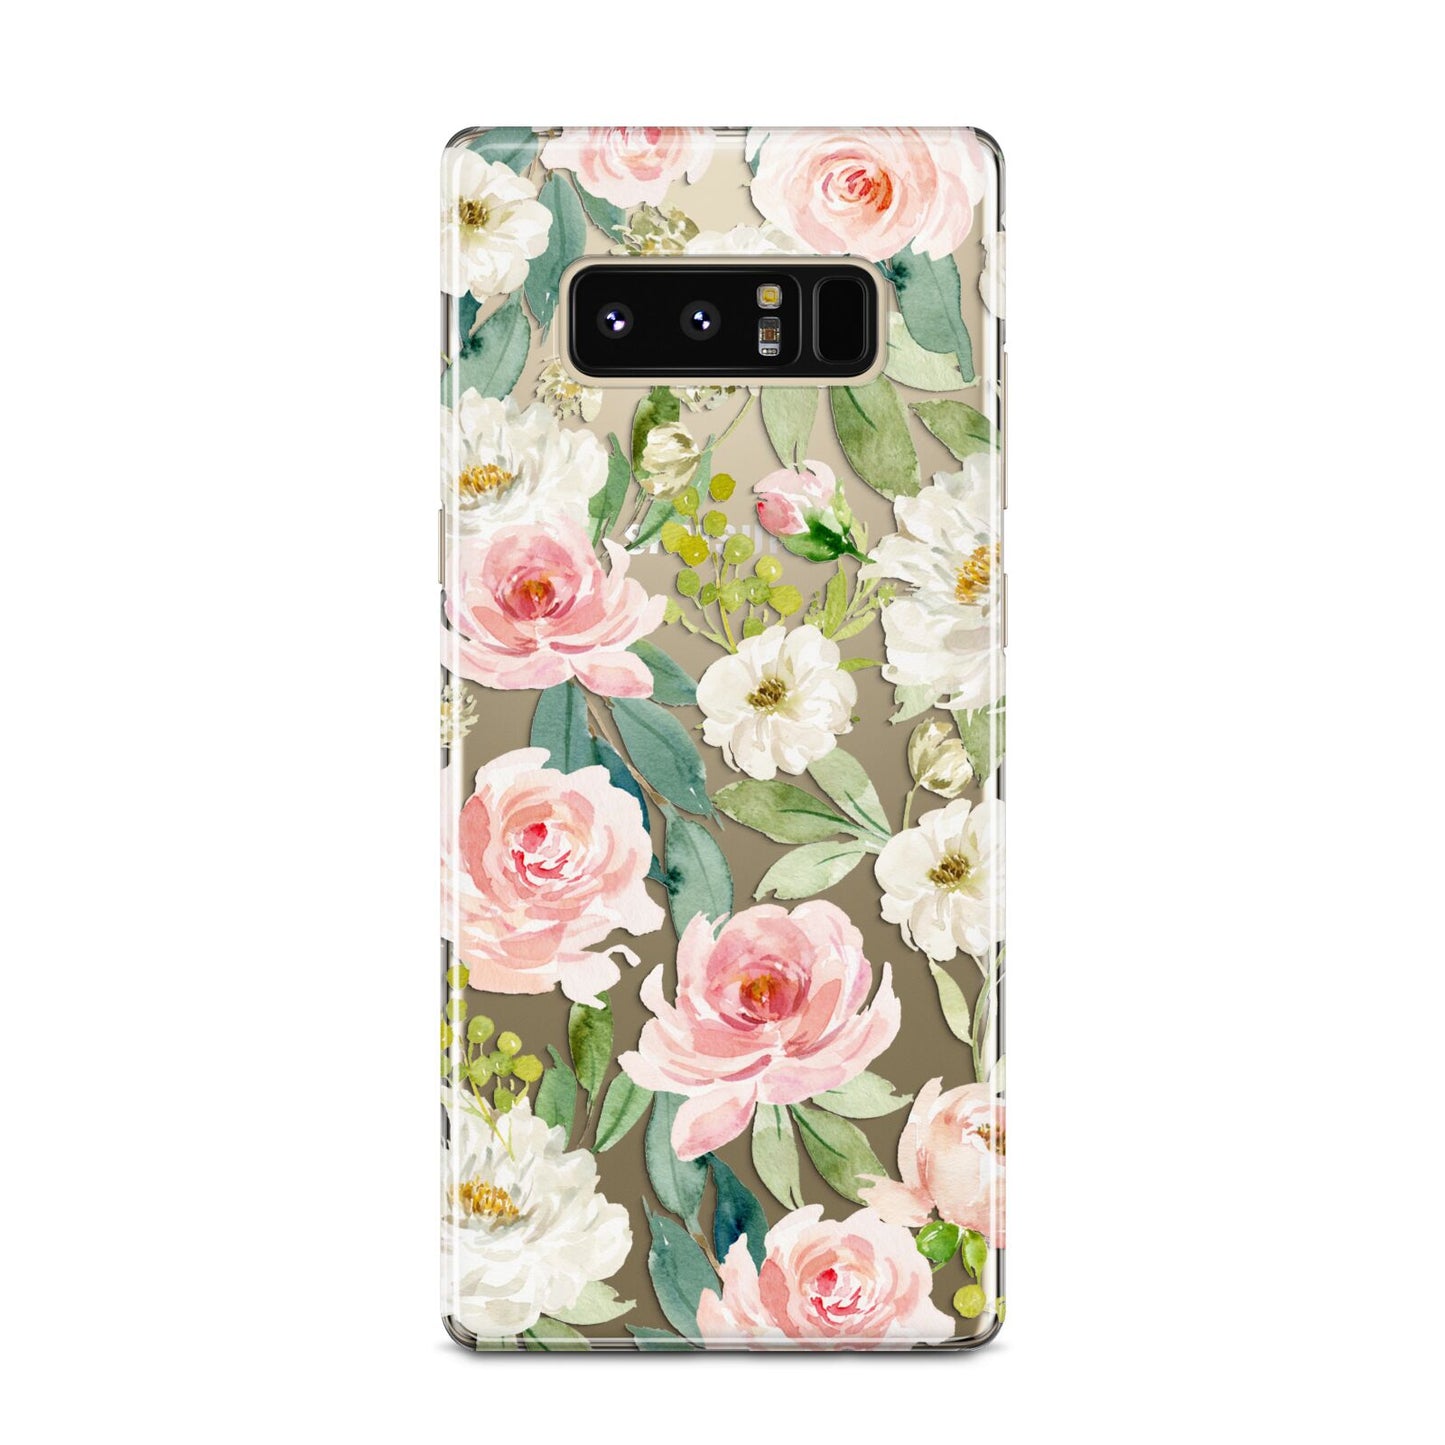 Watercolour Peonies Roses and Foliage Samsung Galaxy Note 8 Case